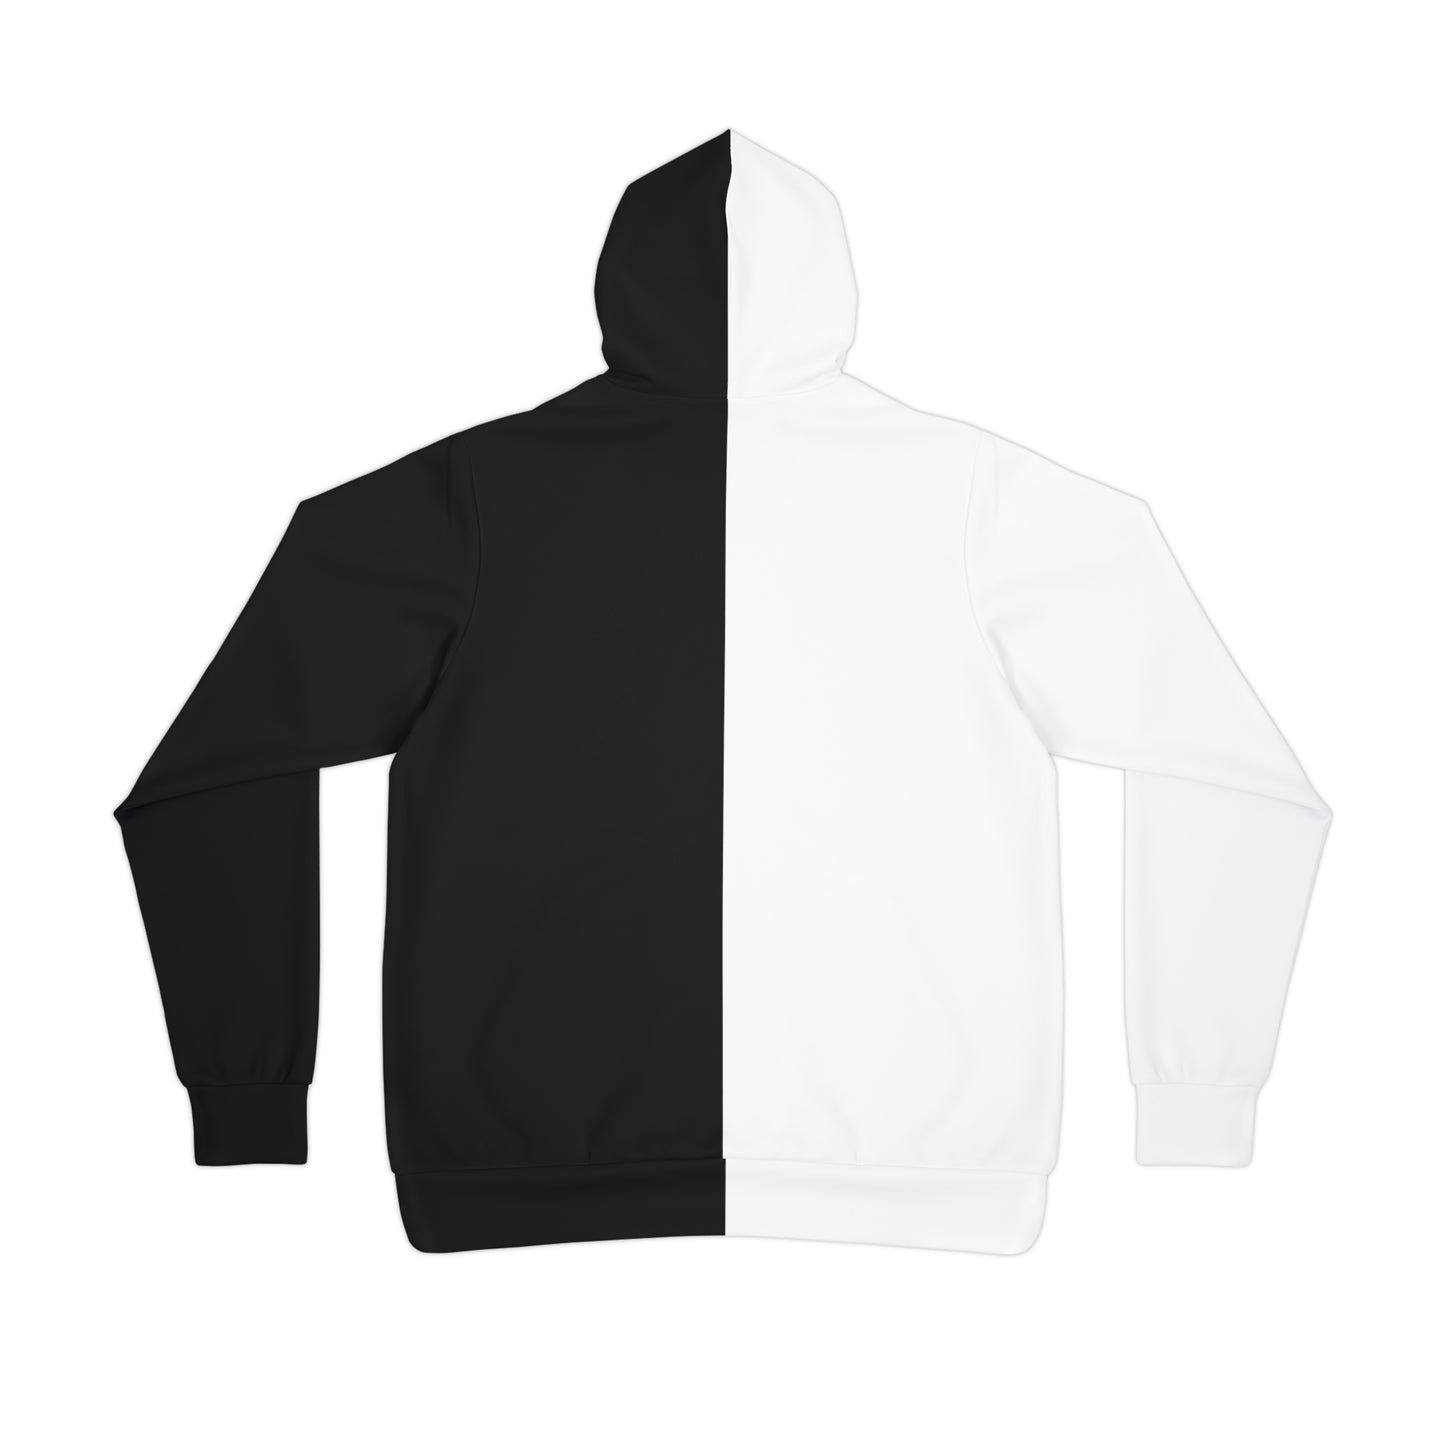 Monochrome Classic: The Timeless Black & White Hoodie